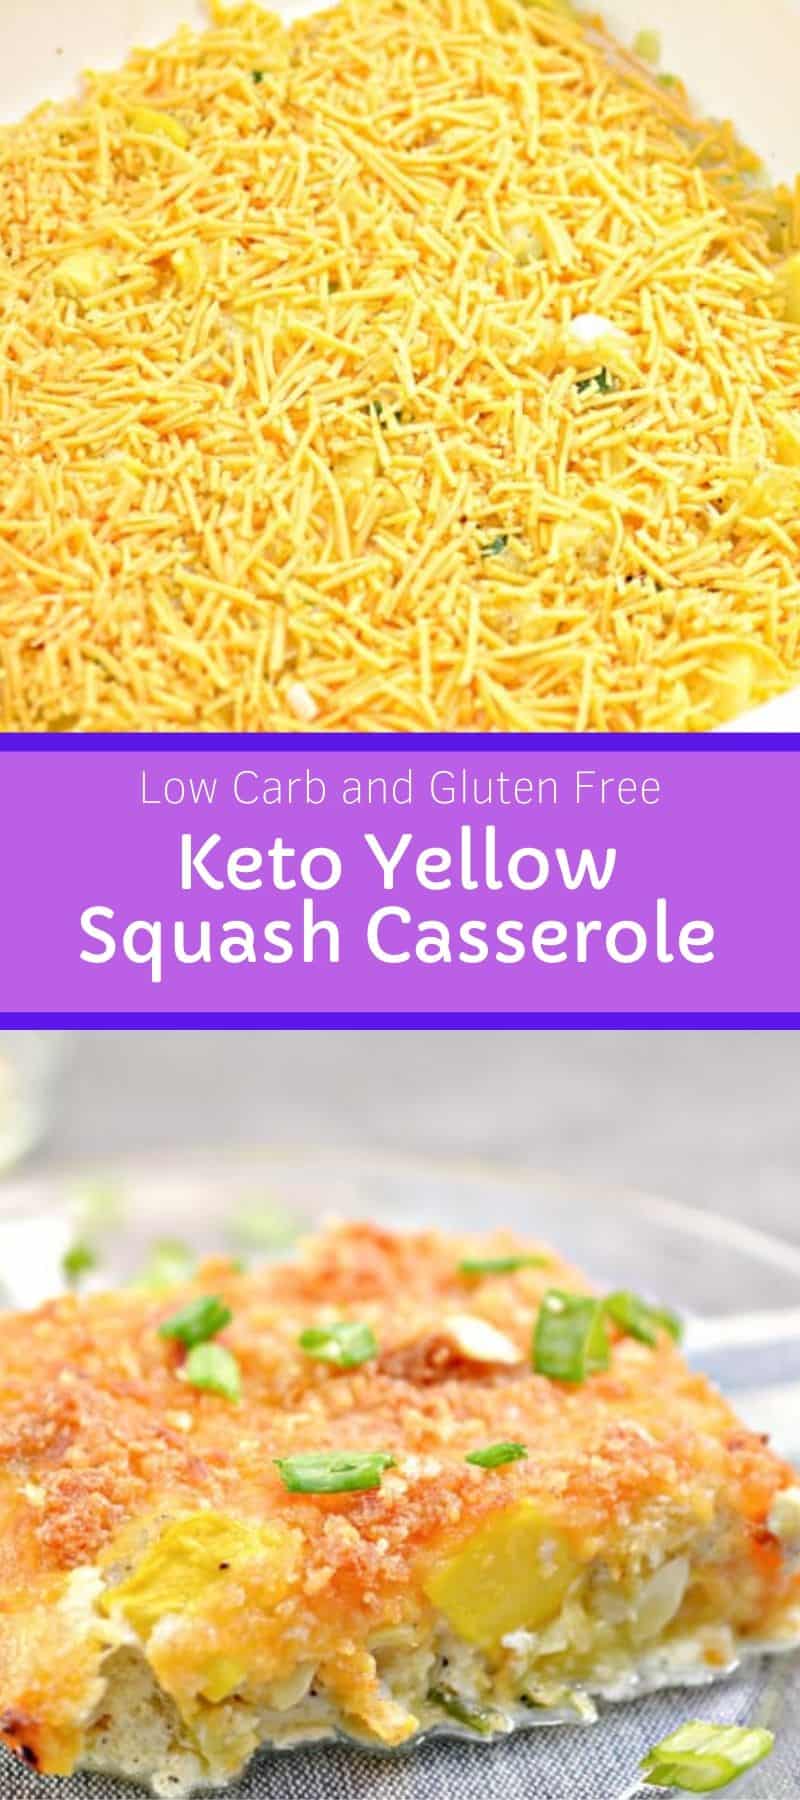 Keto Yellow Squash Casserole Low Carb and Gluten Free 3